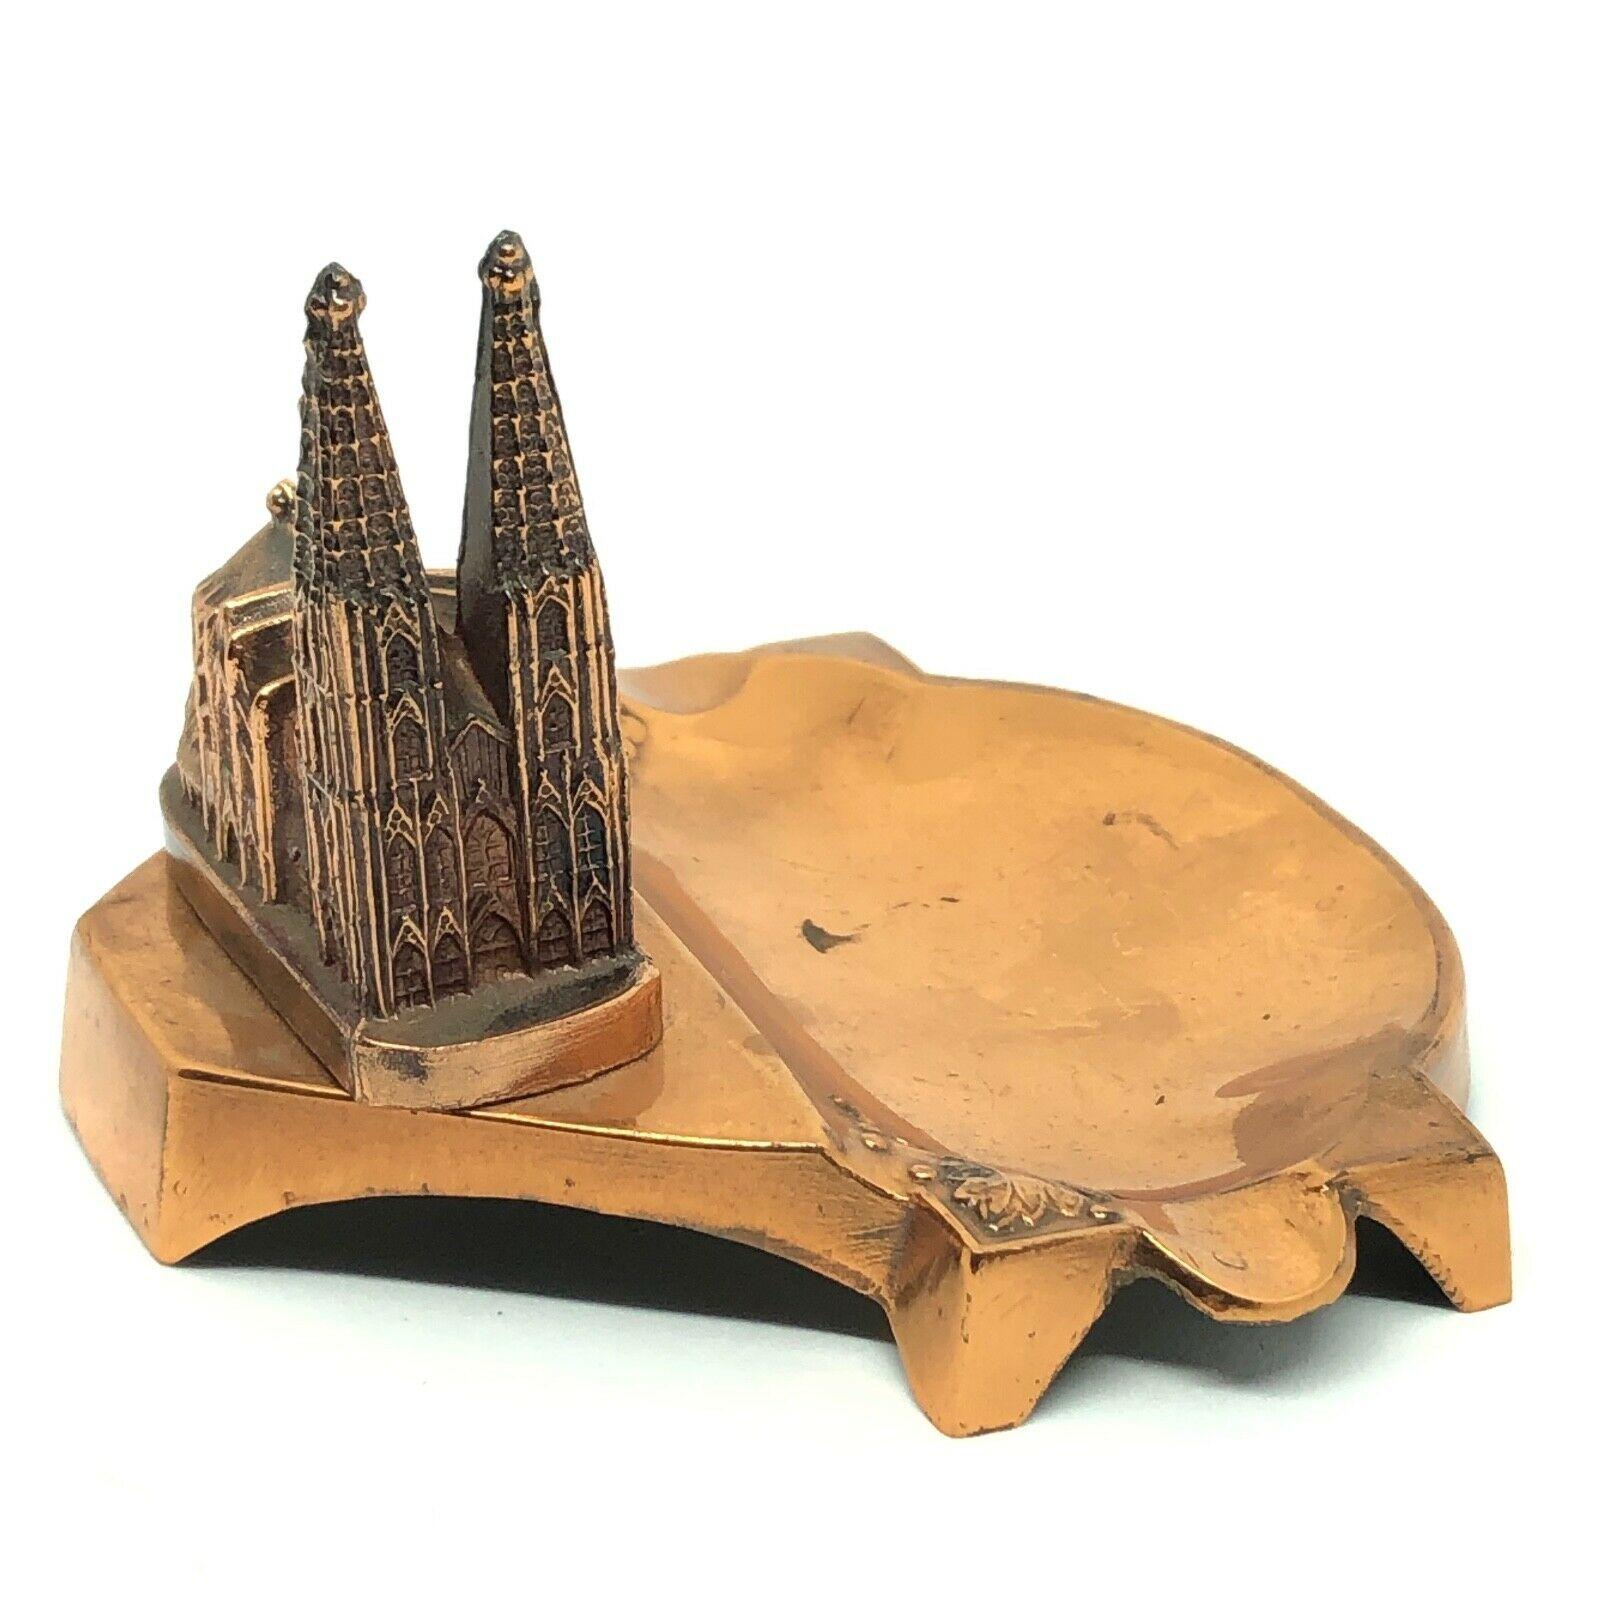 A 1960s souvenir building architectural model Ashtray. Some wear with a nice patina, but this is old-age. Made of metal. A beautiful nice desktop item or just a display item in your collections of souvenirs from around the world.

  